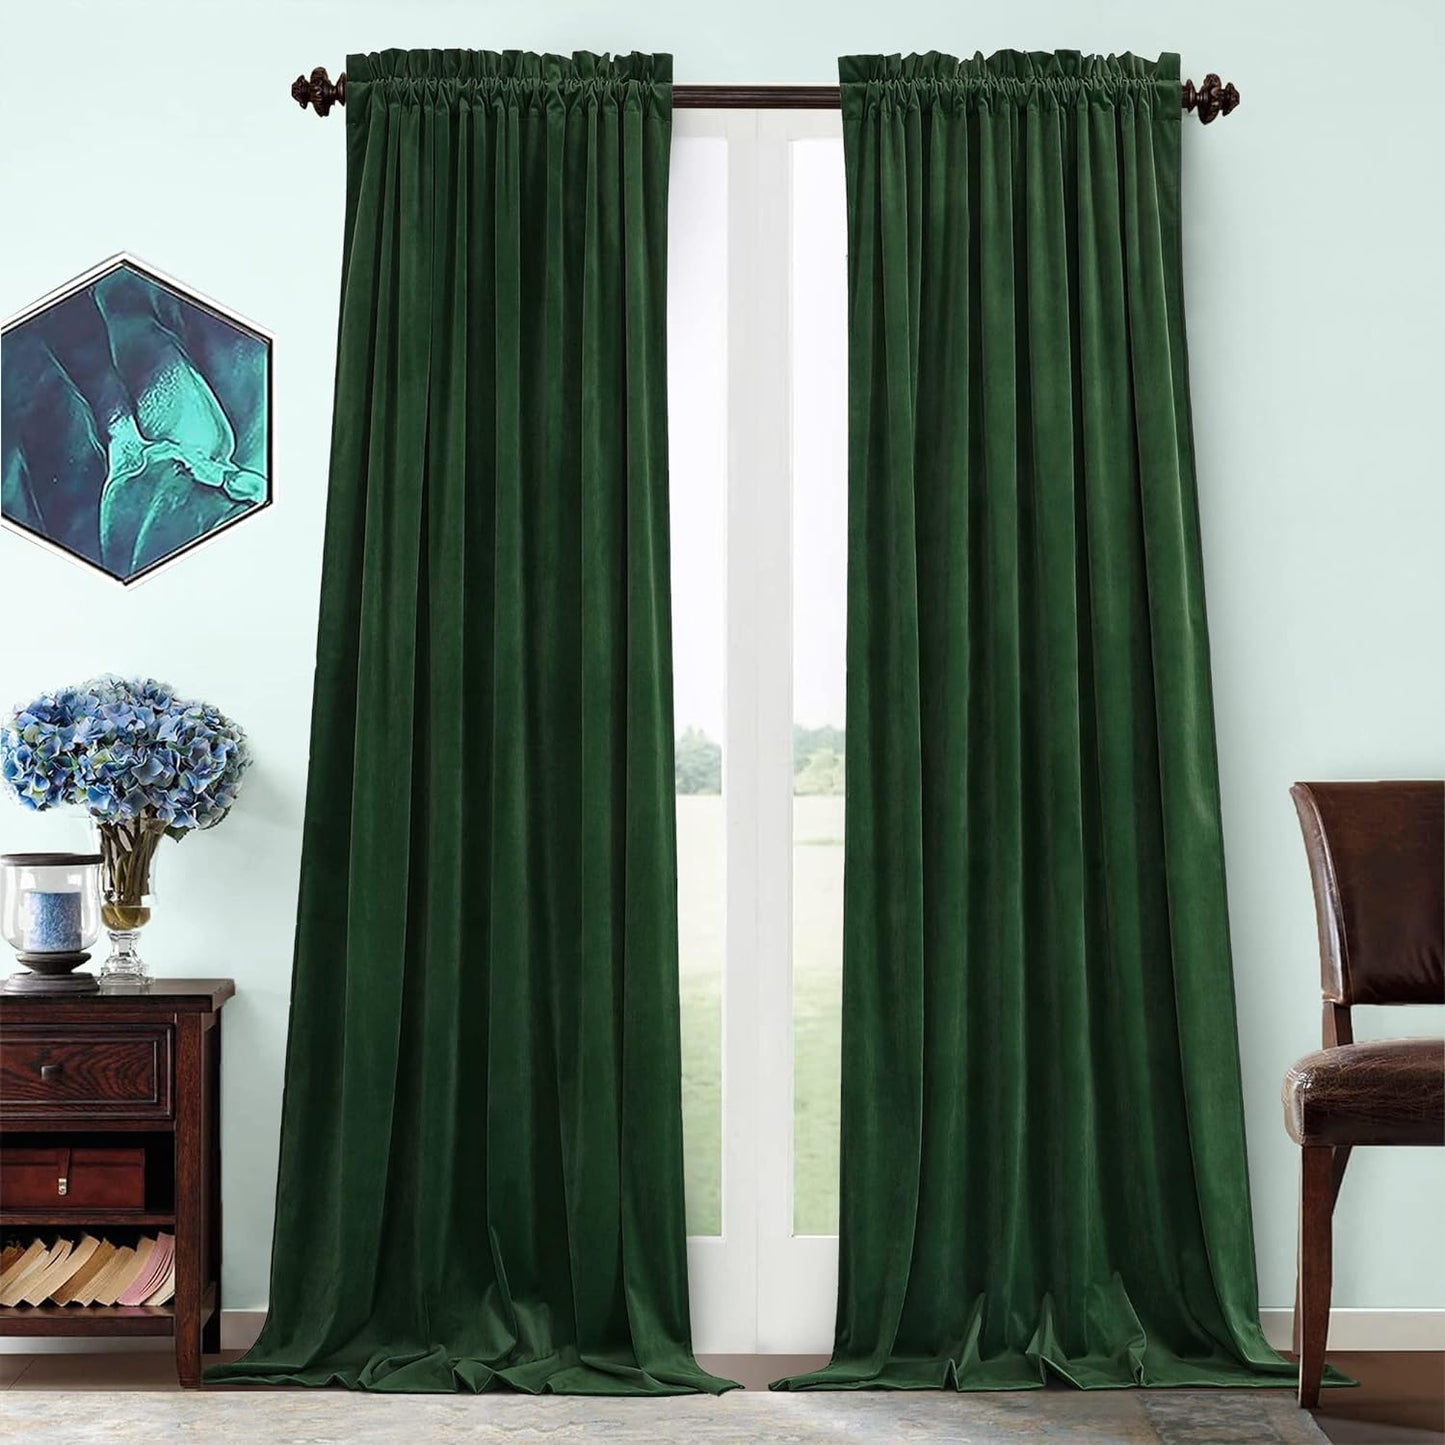 Benedeco Green Velvet Curtains for Bedroom Window, Super Soft Luxury Drapes, Room Darkening Thermal Insulated Rod Pocket Curtain for Living Room, W52 by L84 Inches, 2 Panels  Benedeco Dark Green W52 * L108 | 2 Panels 